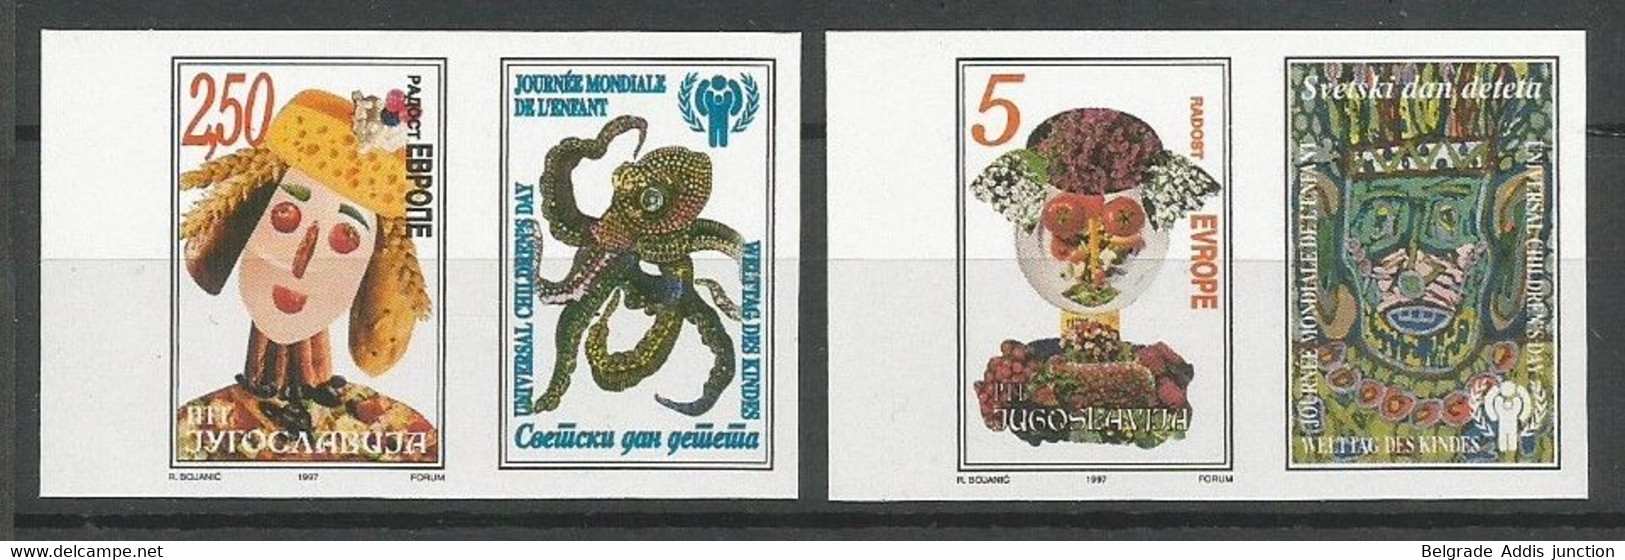 Yugoslavia Mi.2834/35 IMPERFORATED PROOF ESSAYS With LABELS Unadopted Design ** / MNH 1997 Europa Hang-on Issues RARITY! - Imperforates, Proofs & Errors